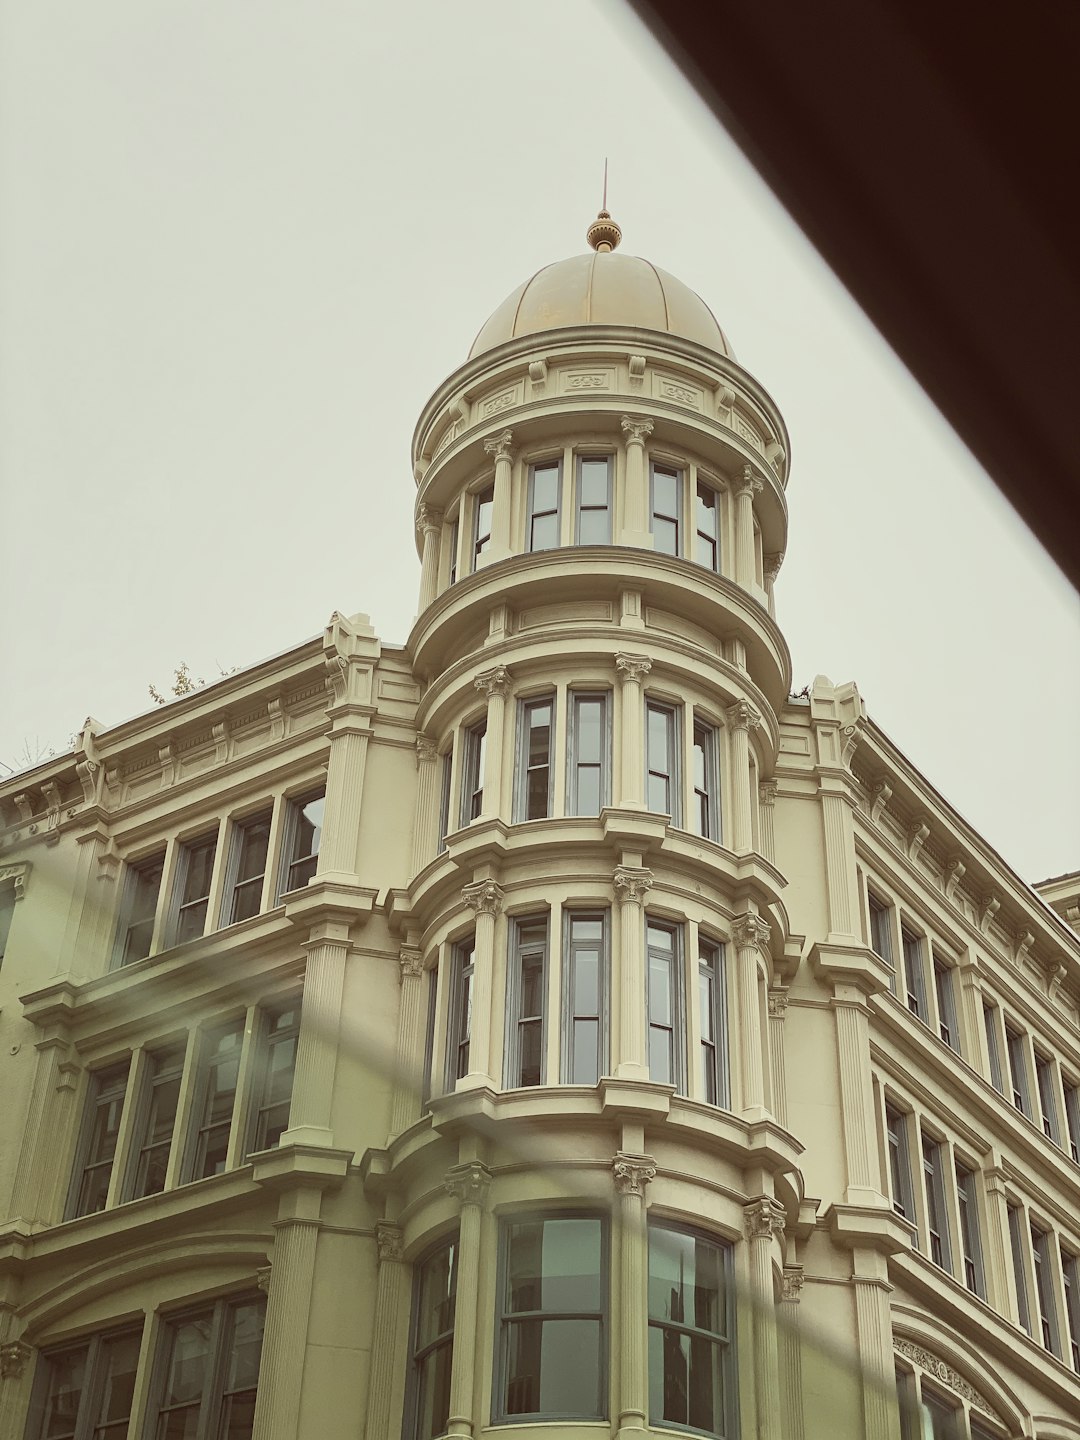 white painted dome building during daytime